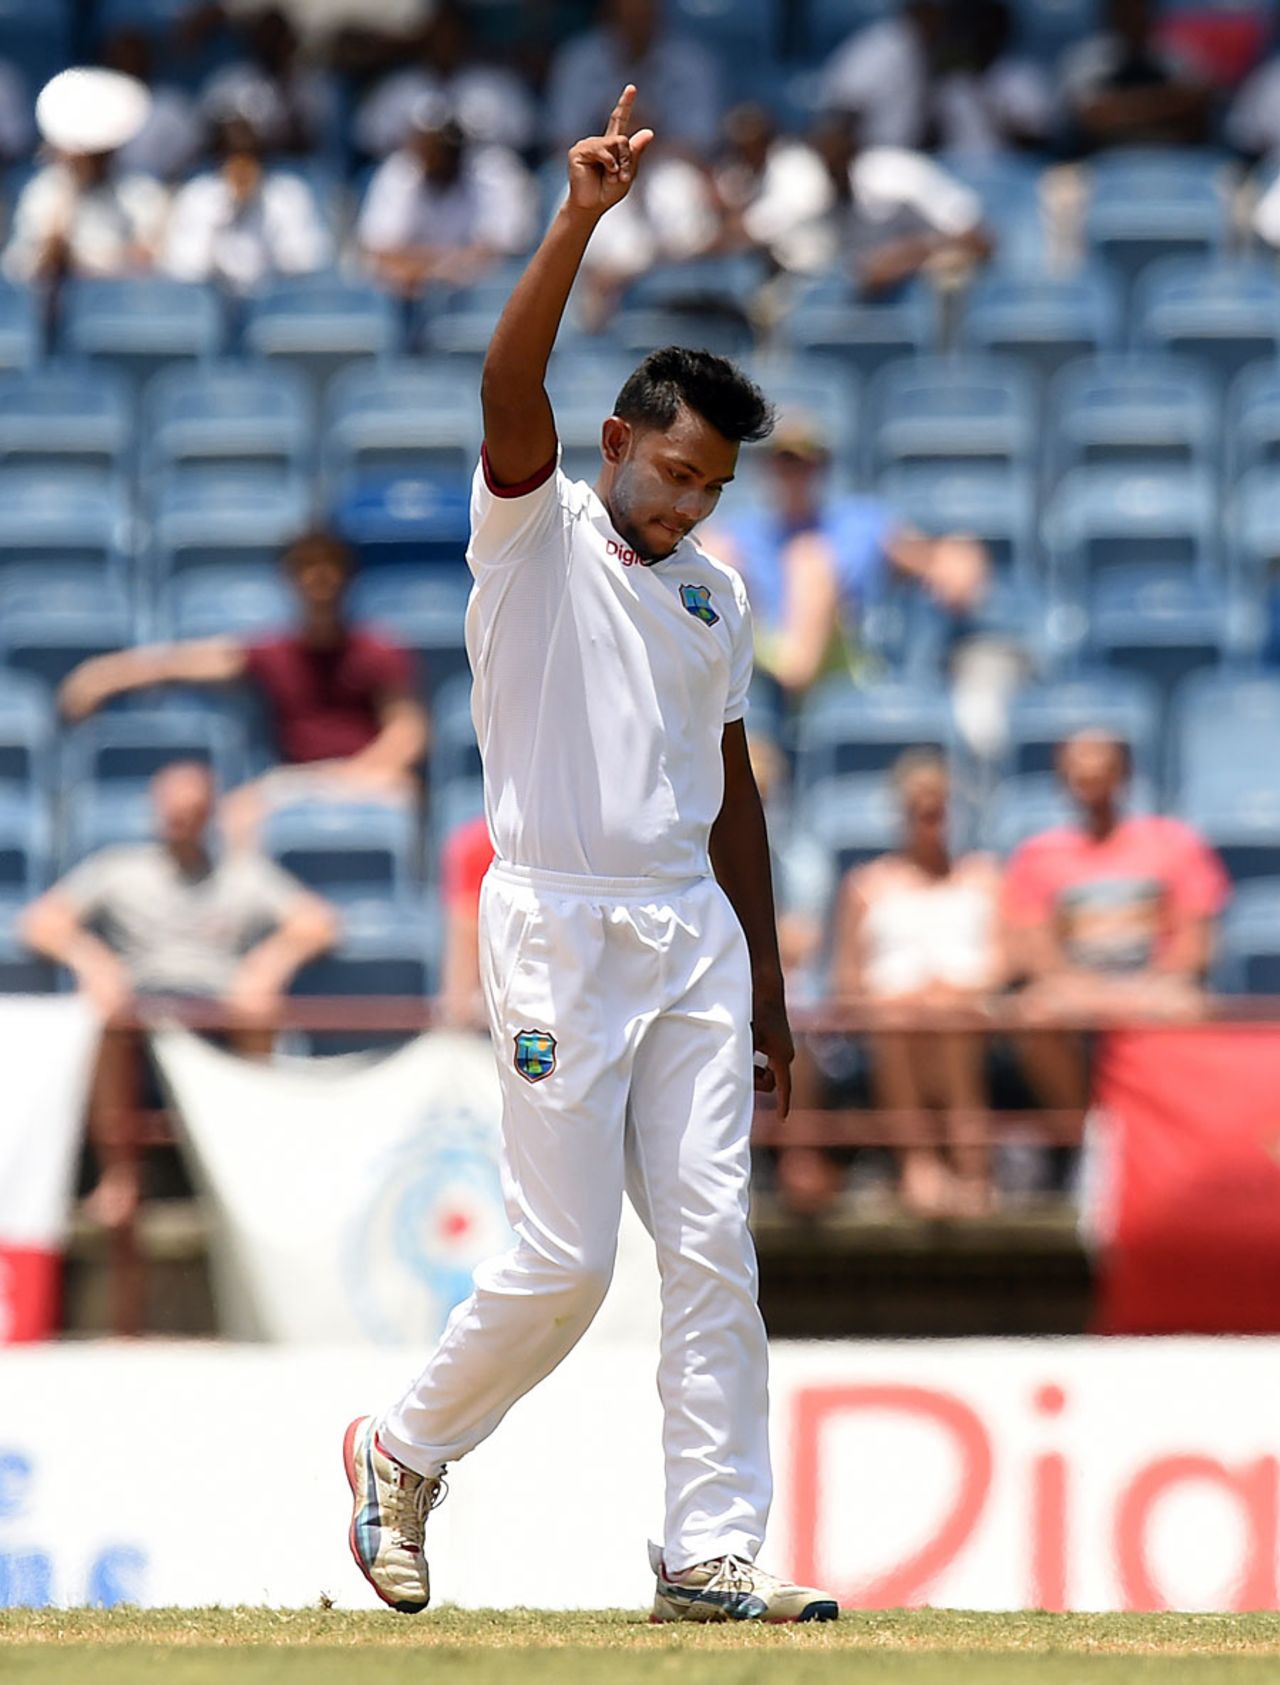 Devendra Bishoo broke England's opening stand, West Indies v England, 2nd Test, St George's, 3rd day, April 23, 2015